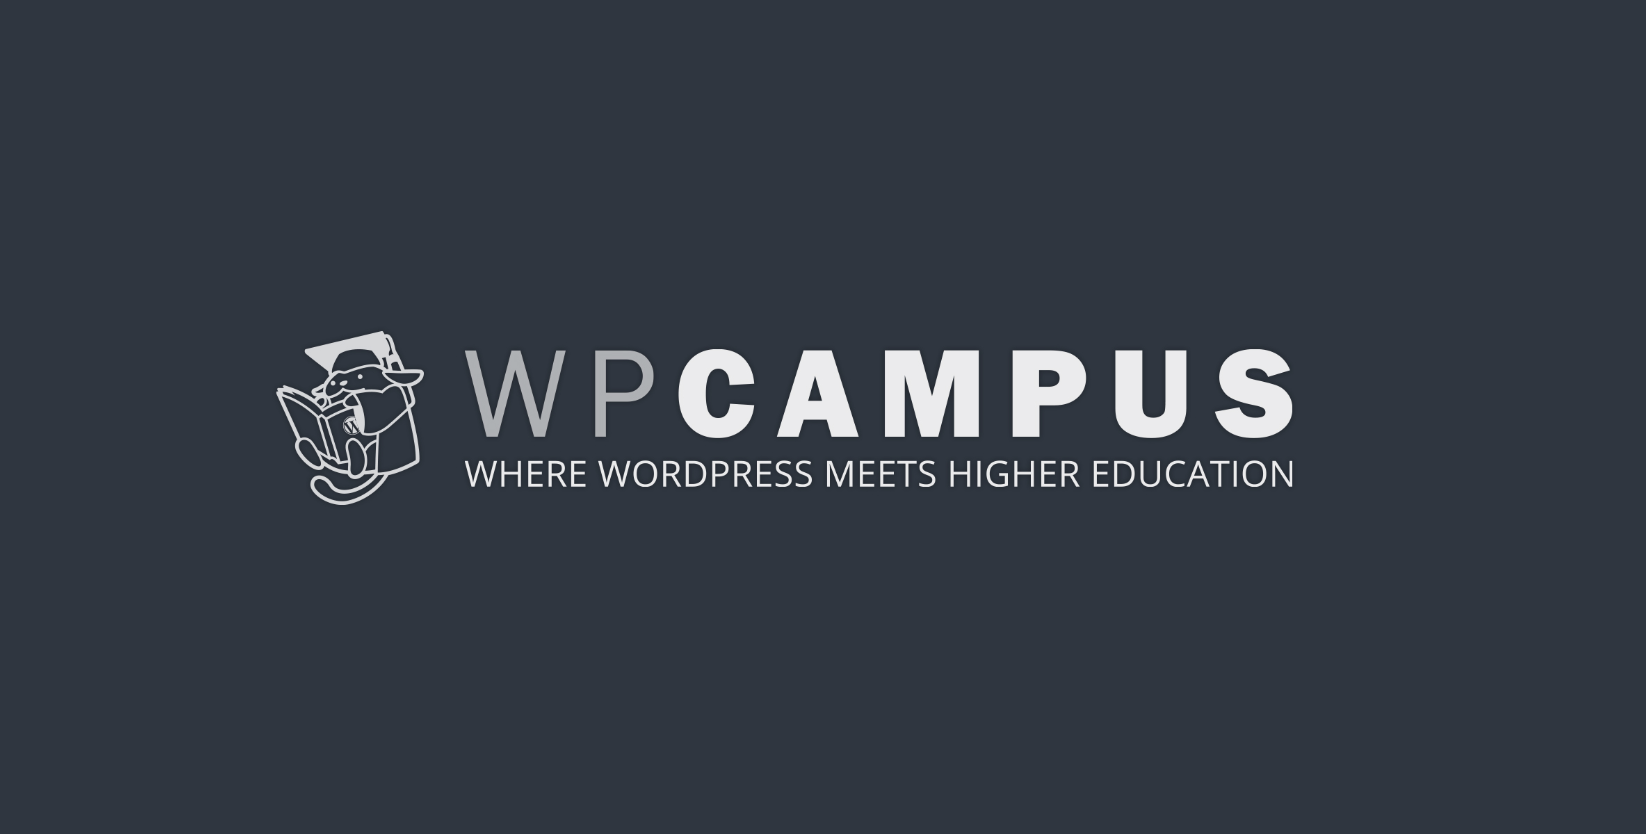 WPCampus Online 2020 Conference Features Accessibility and Higher Education Topics, July 29-30